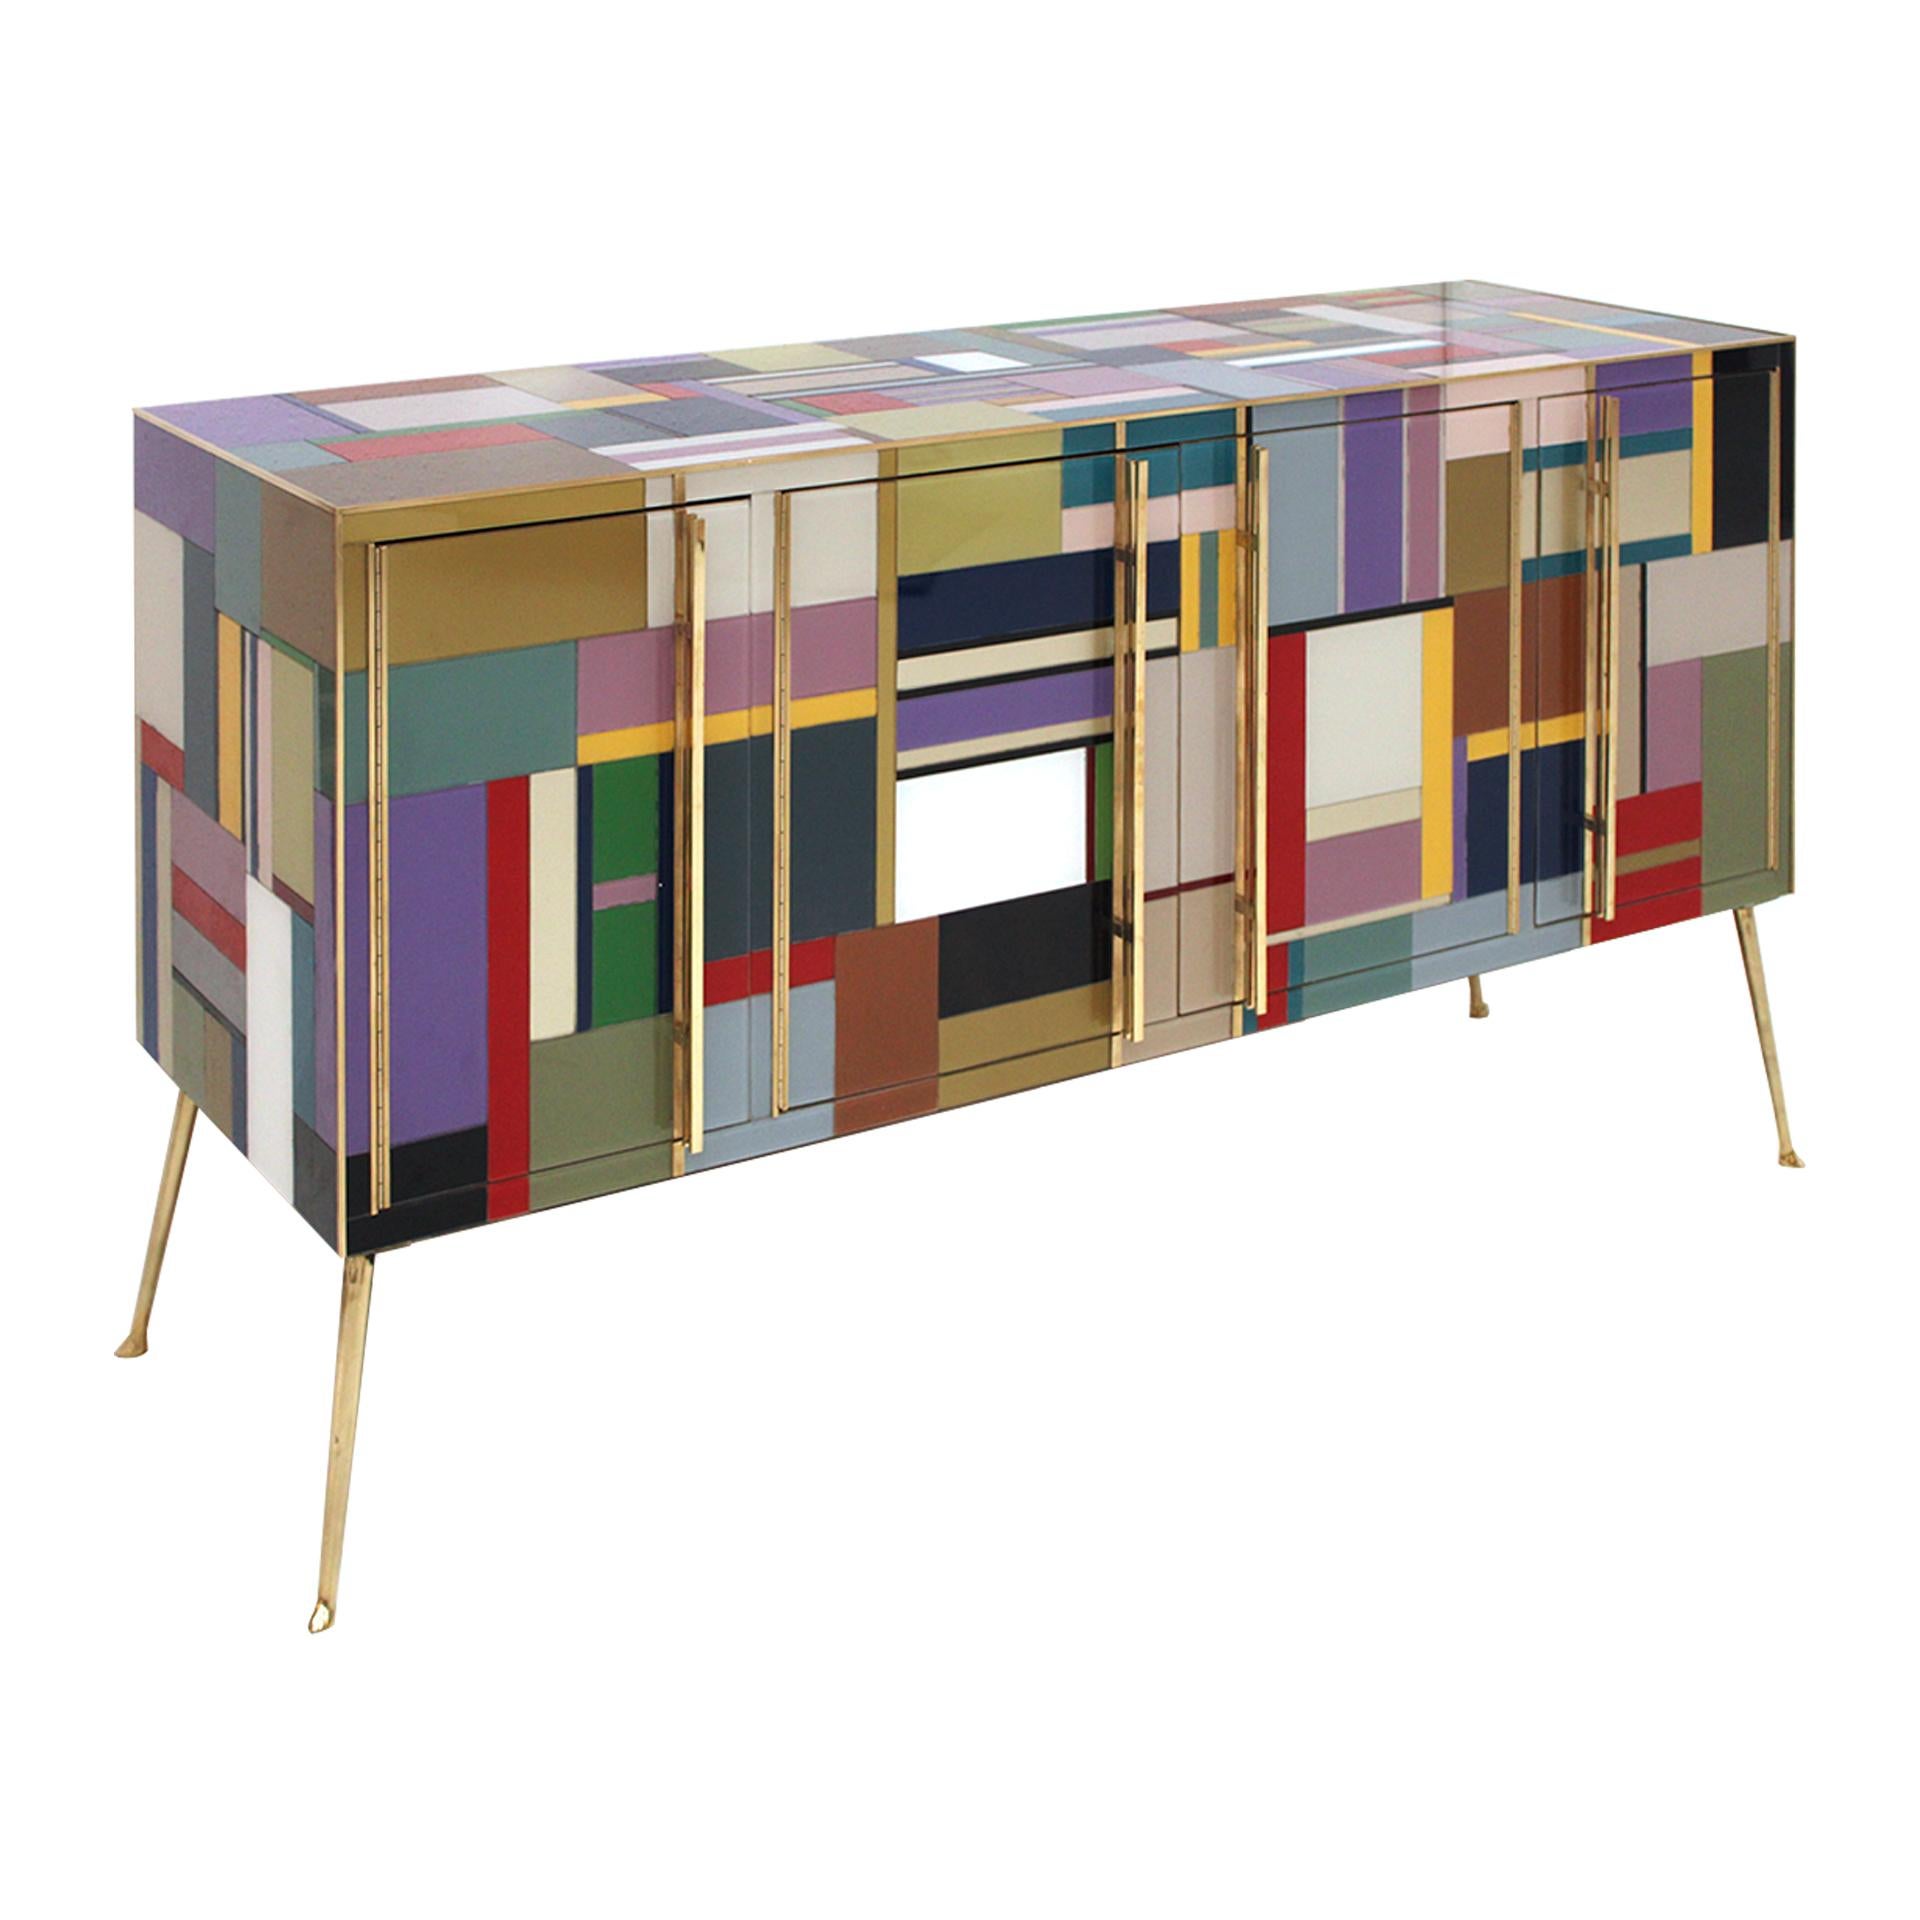 Mid-century sideboard, newly retrofitted in contemporary Murano glass. Comoposed of 4 doors with original 1950s solid wood sturcture covered in colored glass. Handles, profiles and legs made of brass. Italy.

Production can last between 5 and 6